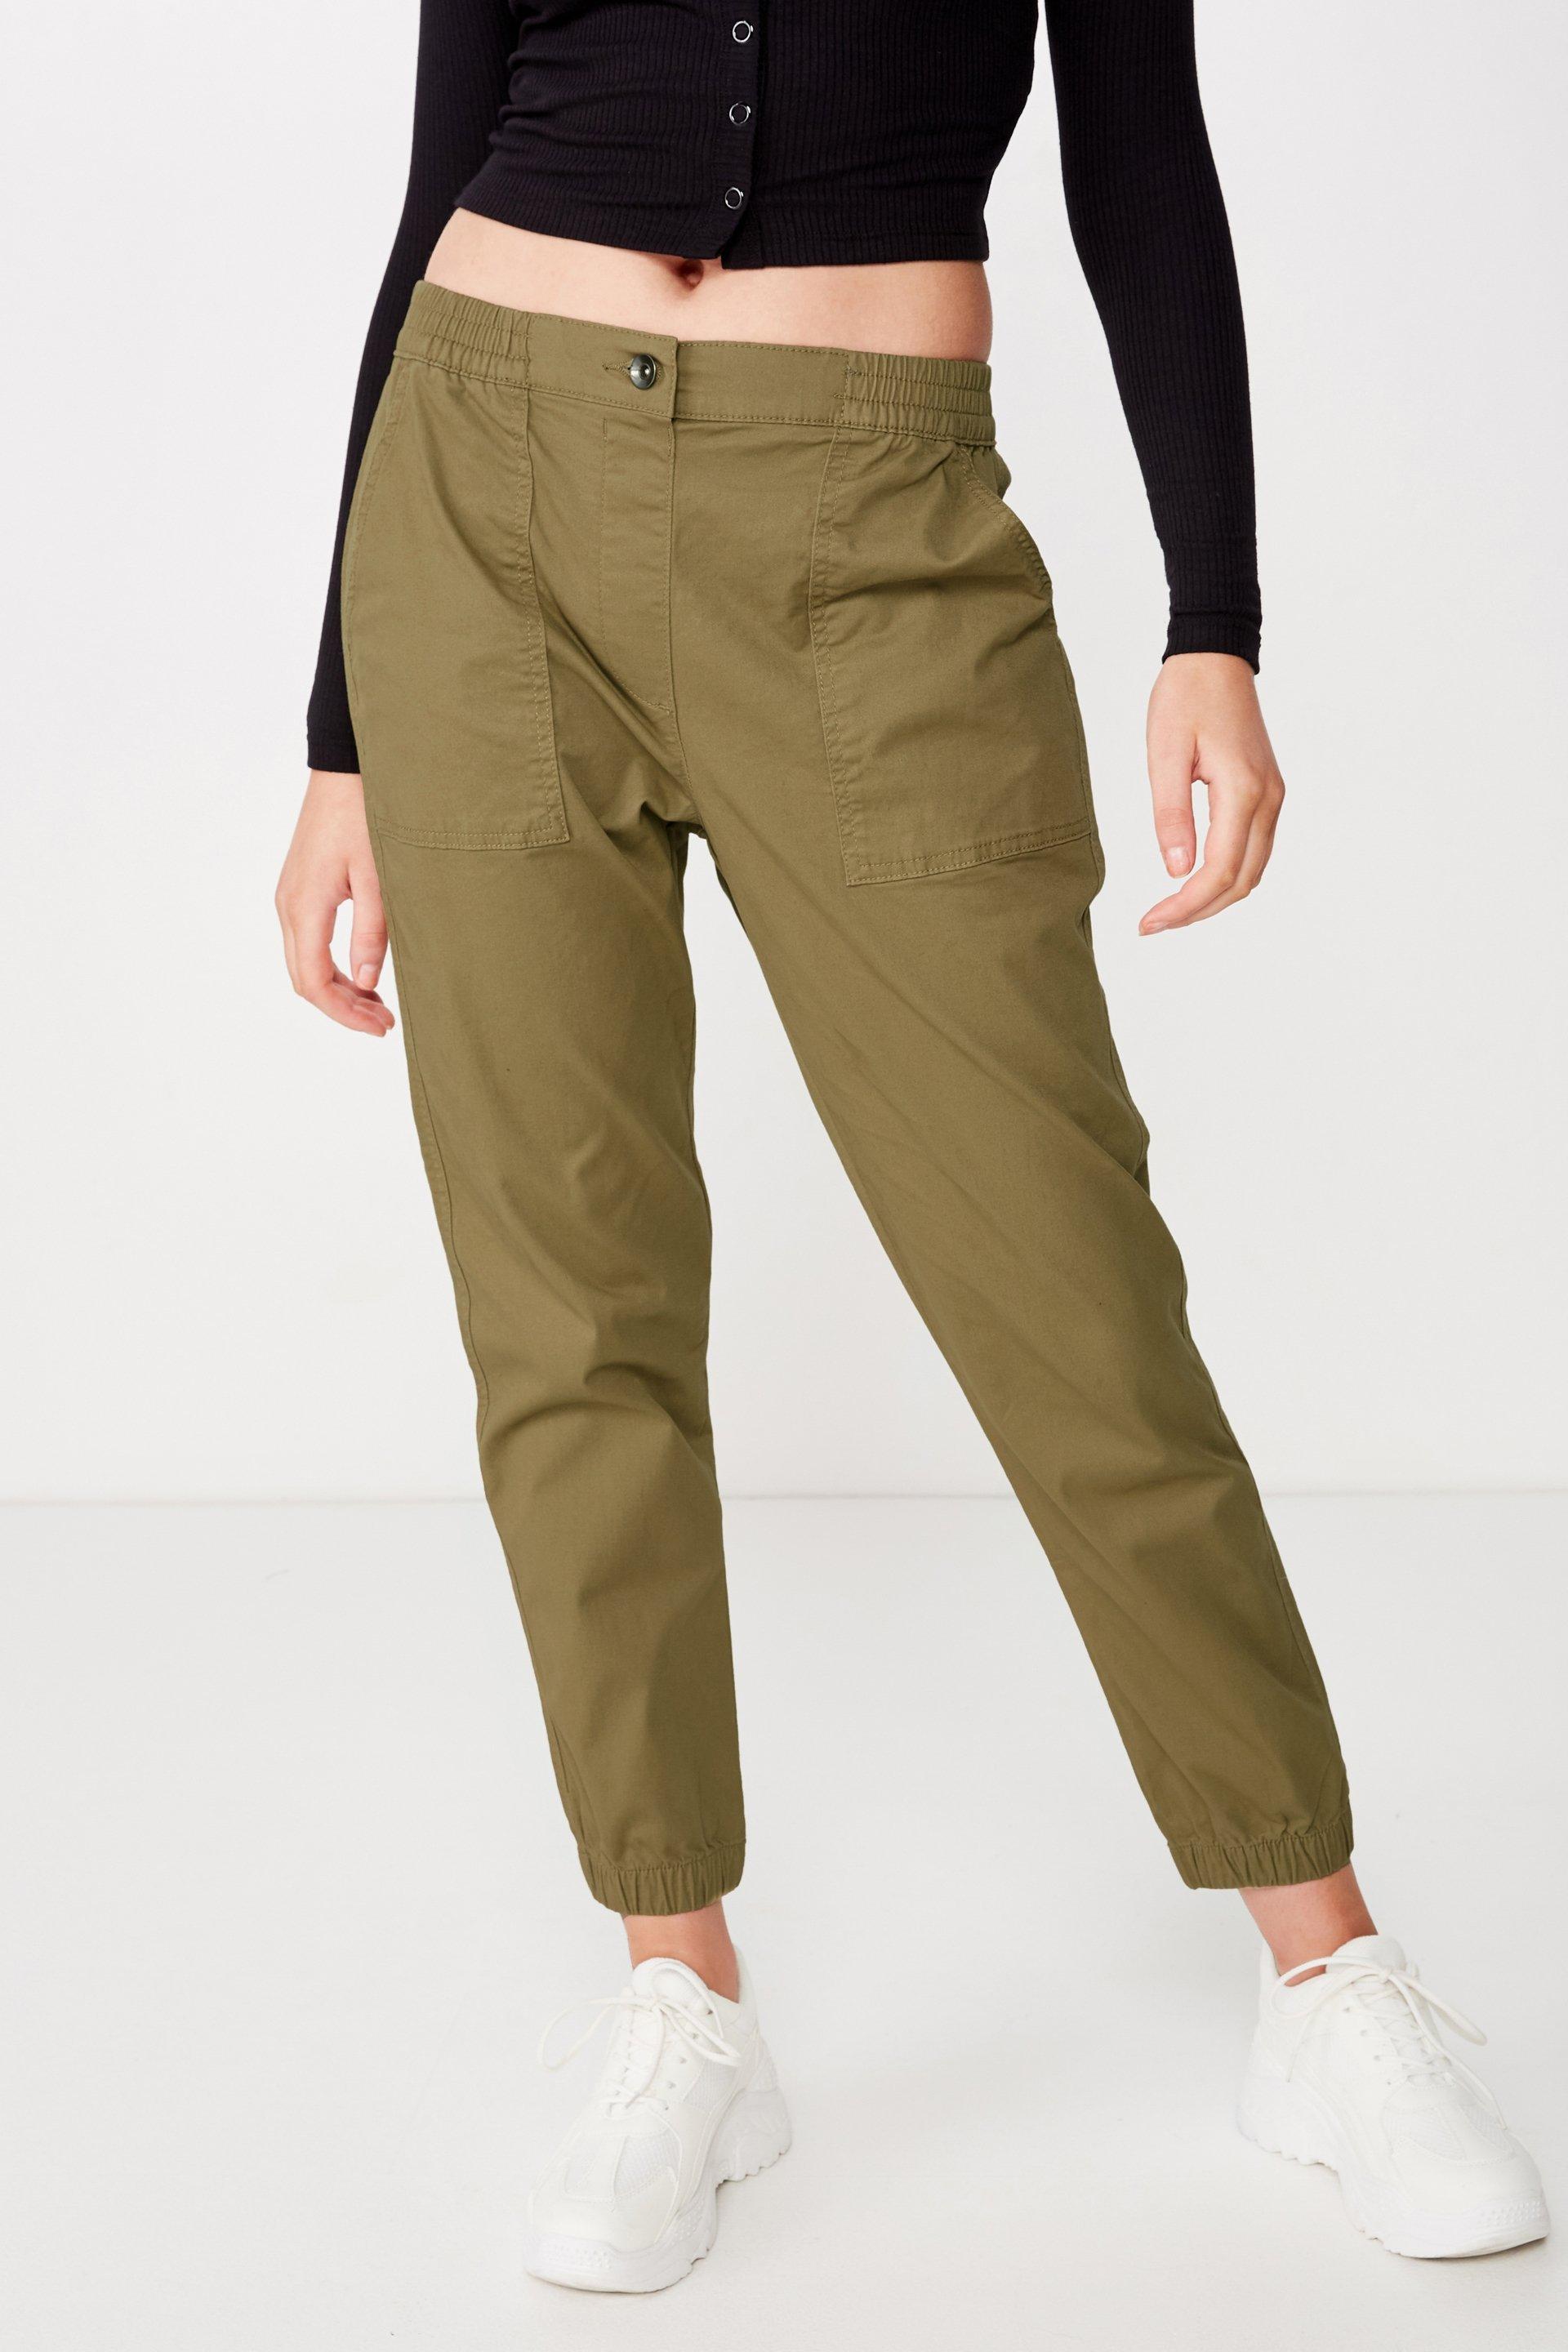 Cuffed chino - light olive Cotton On Trousers | Superbalist.com